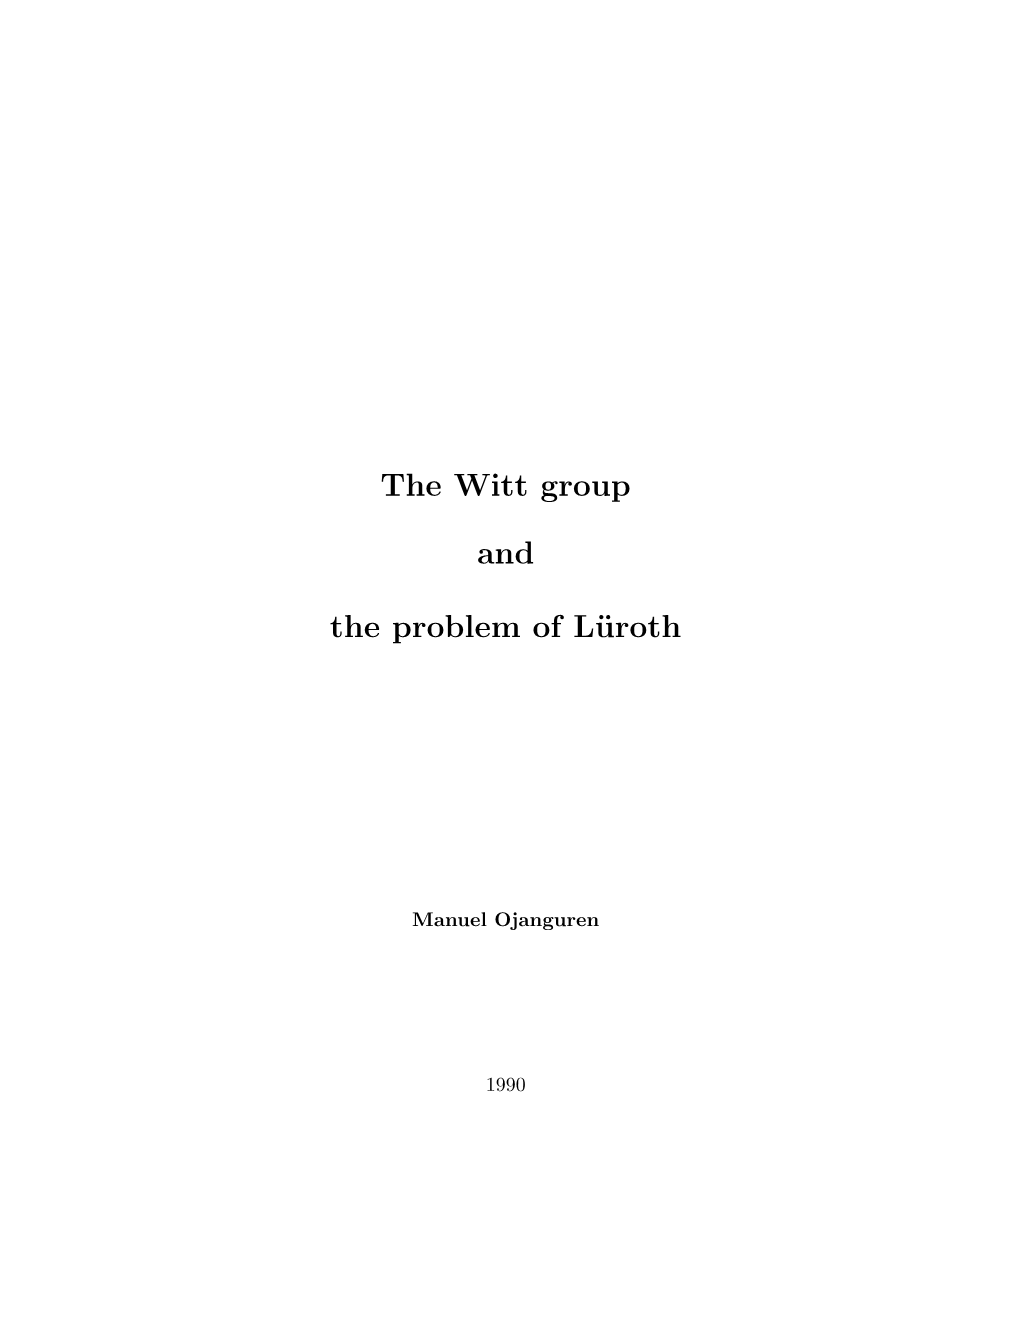 The Witt Group and the Problem of Lüroth